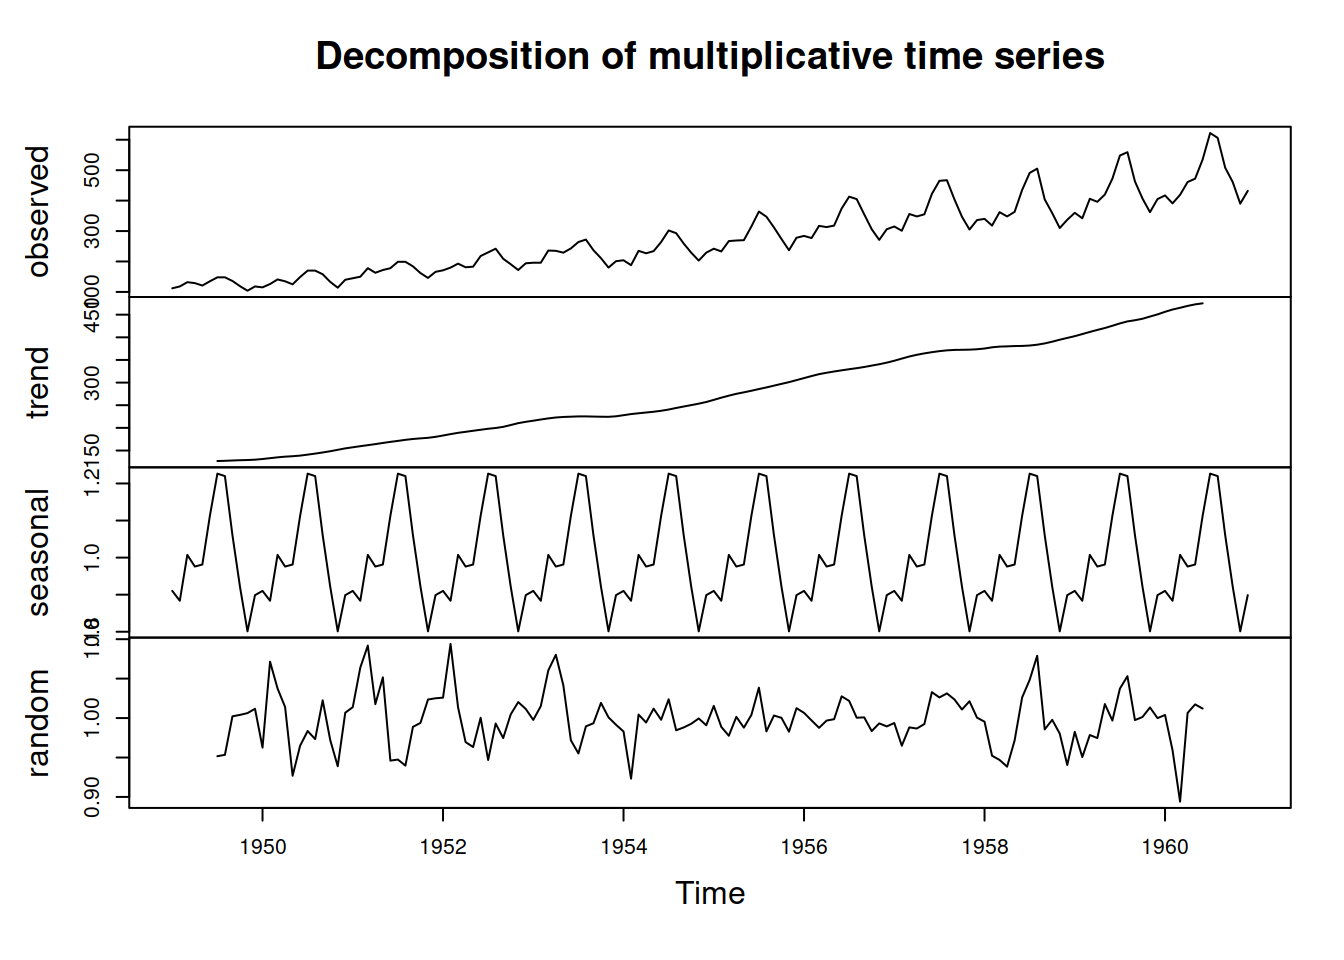 Decomposition of AirPassengers time series according to multiplicative model.